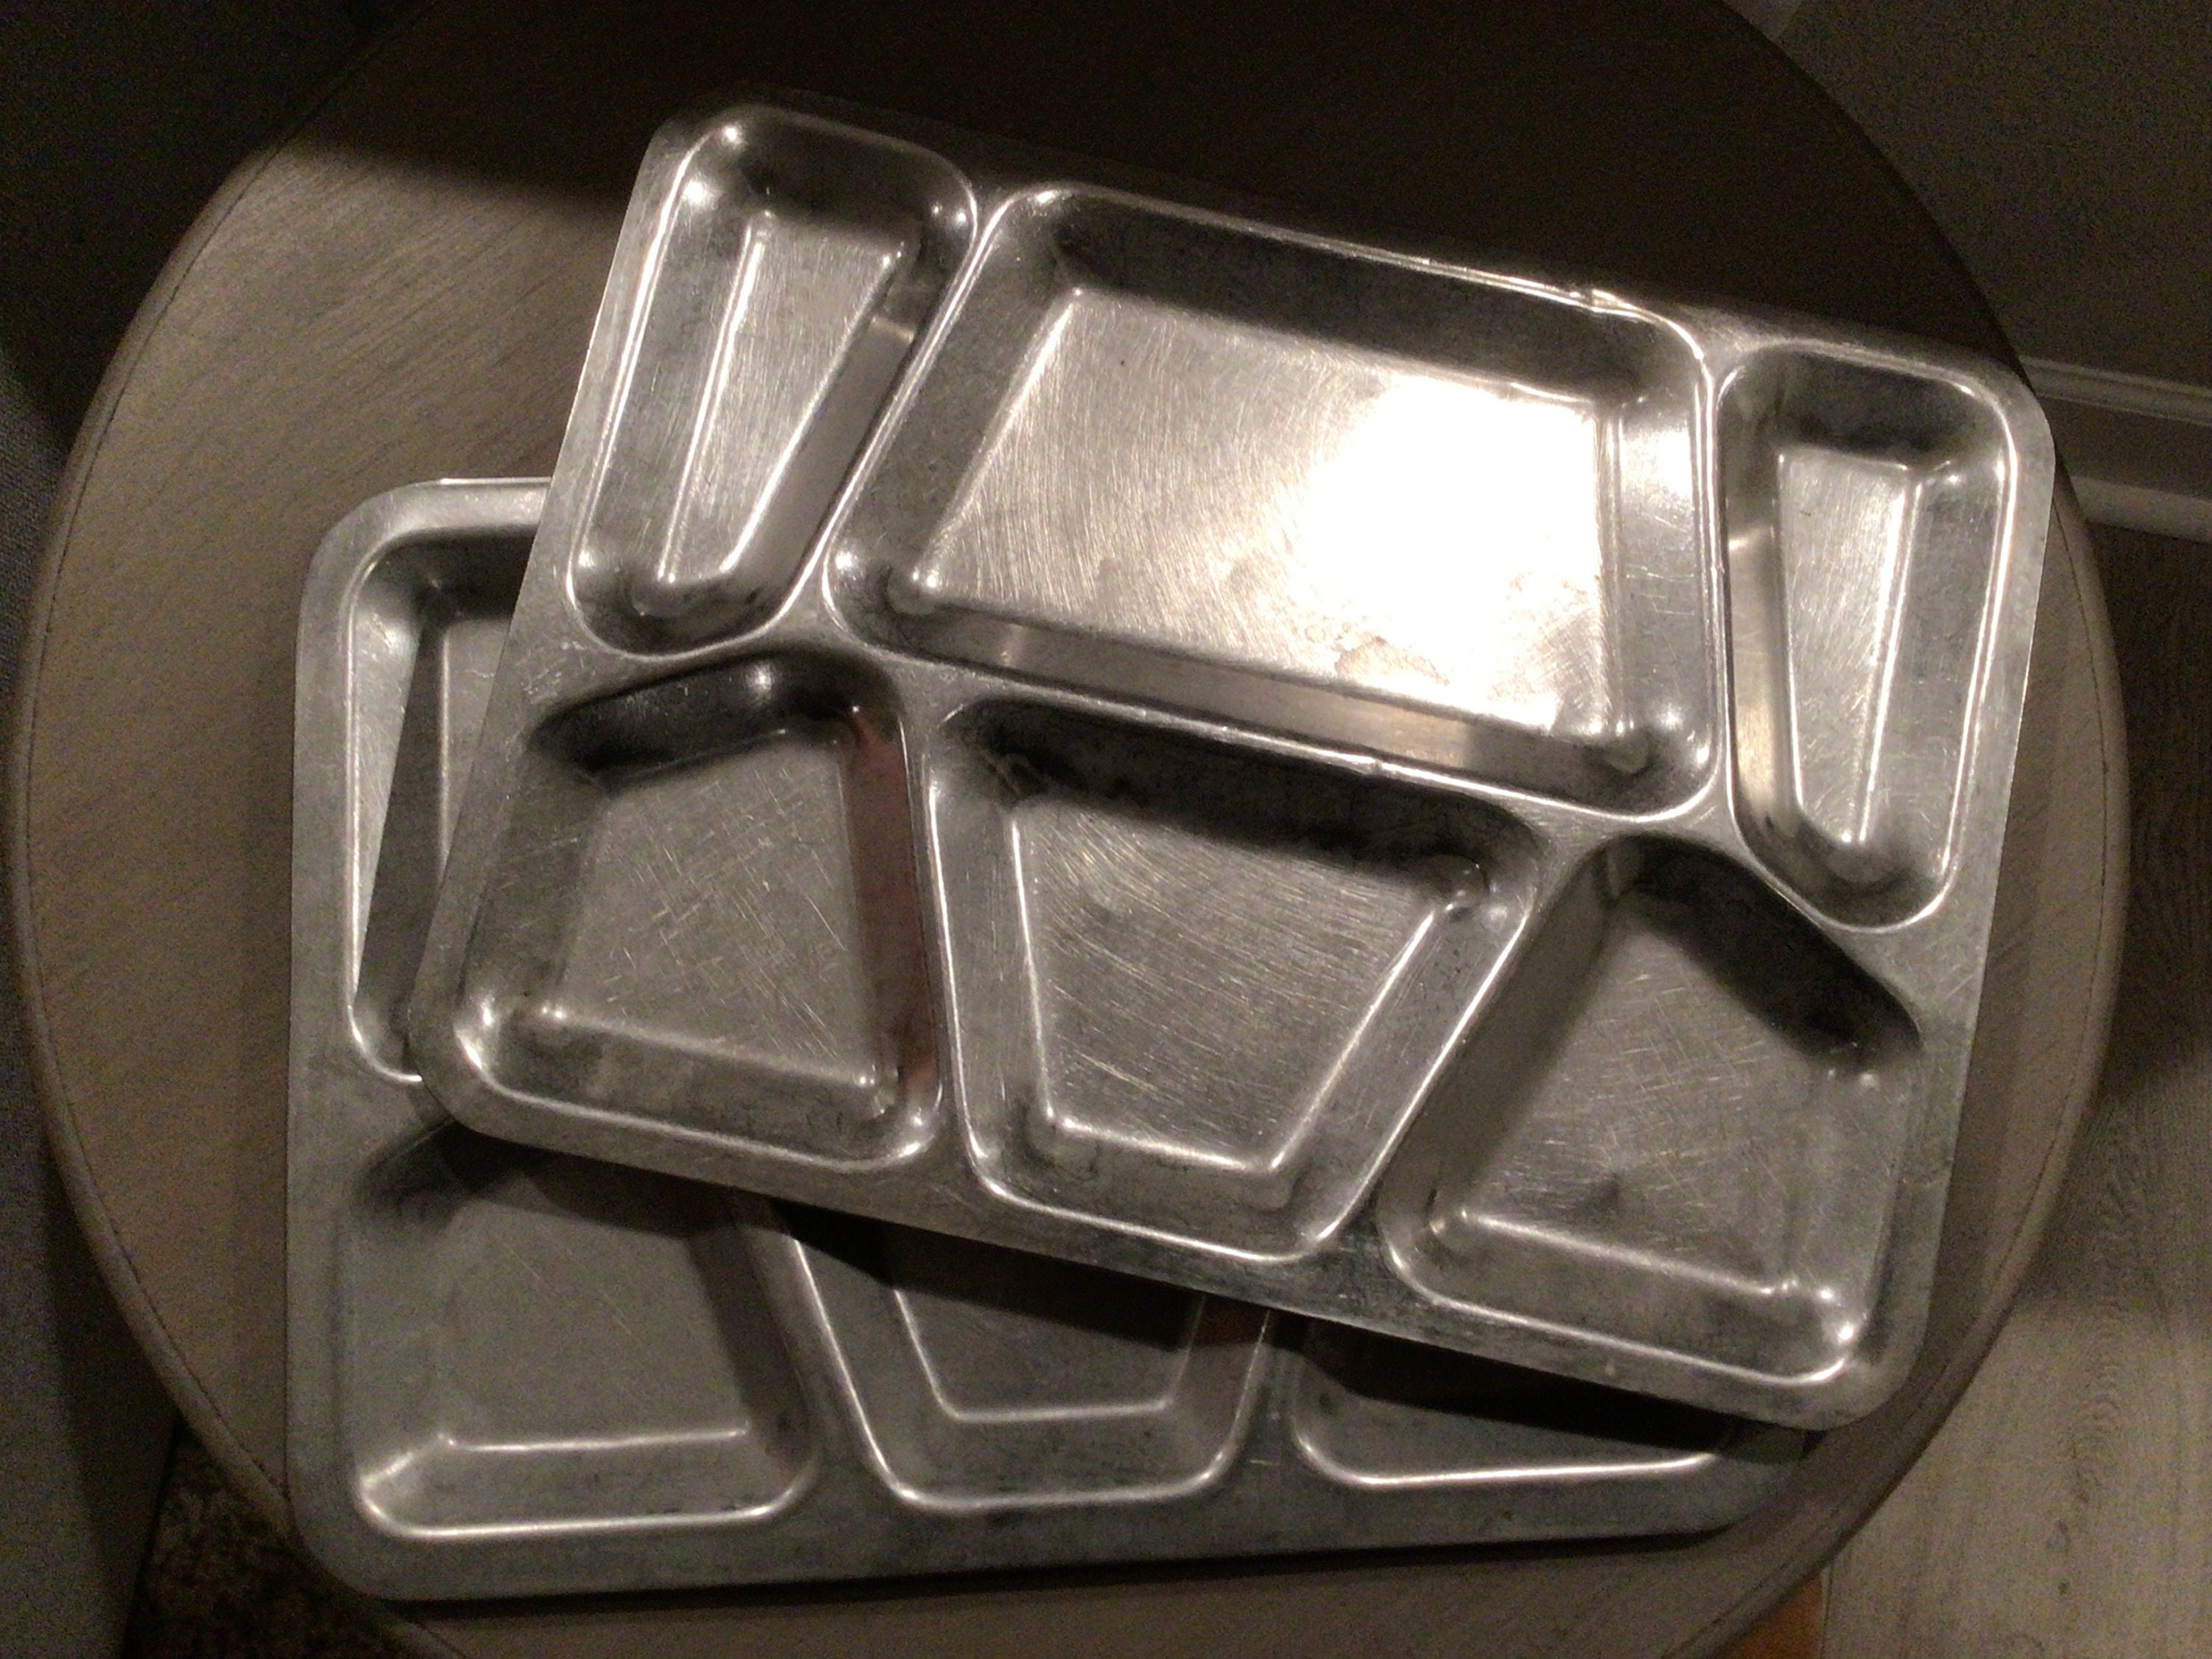 Military Mess Cafeteria Trays 1974-1981 New Gov't Surplus 9 pcs. -  collectibles - by owner - sale - craigslist